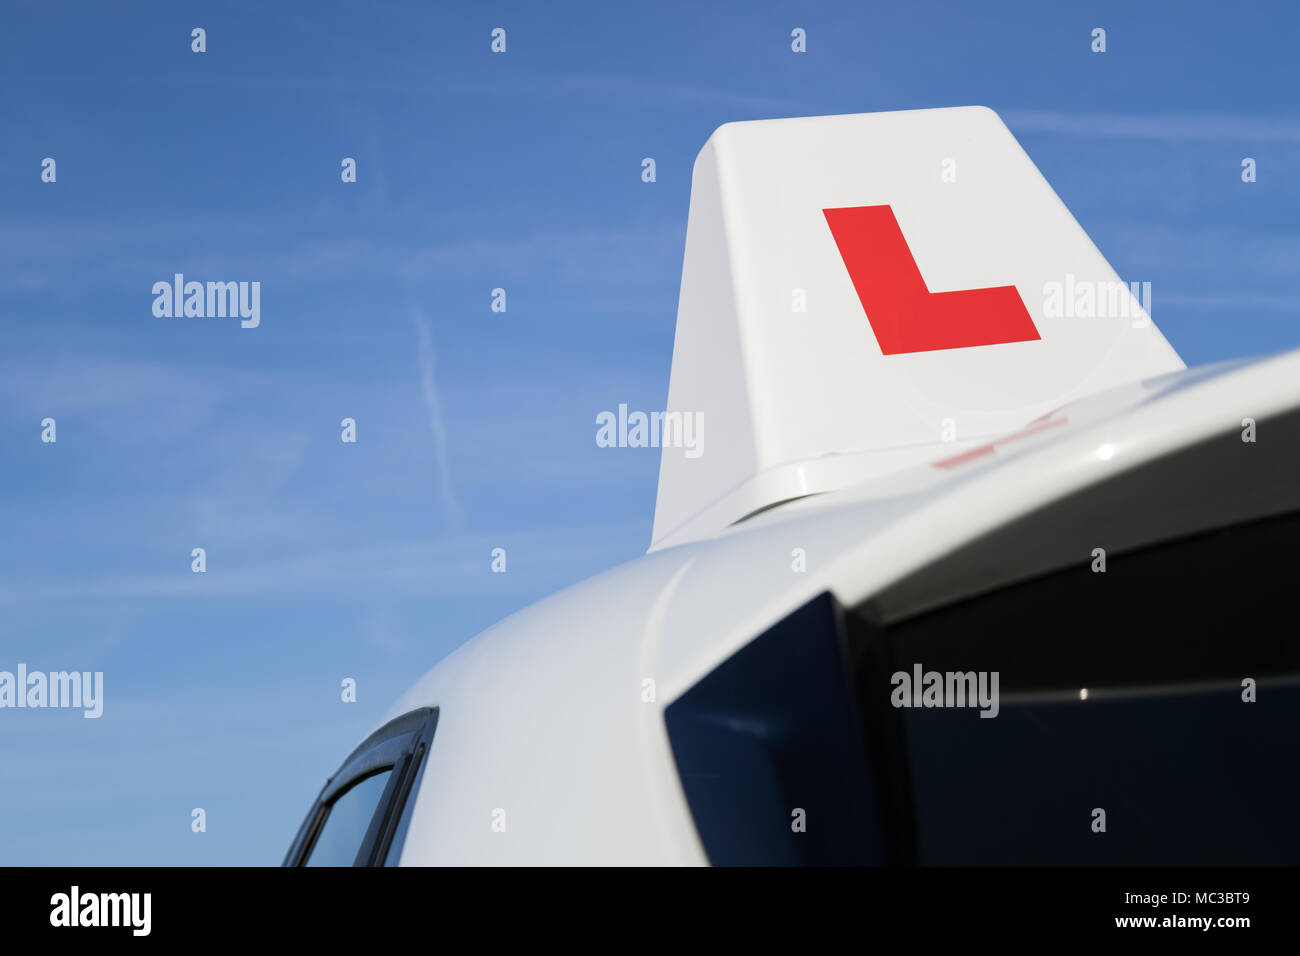 British driving school car roof sign Stock Photo